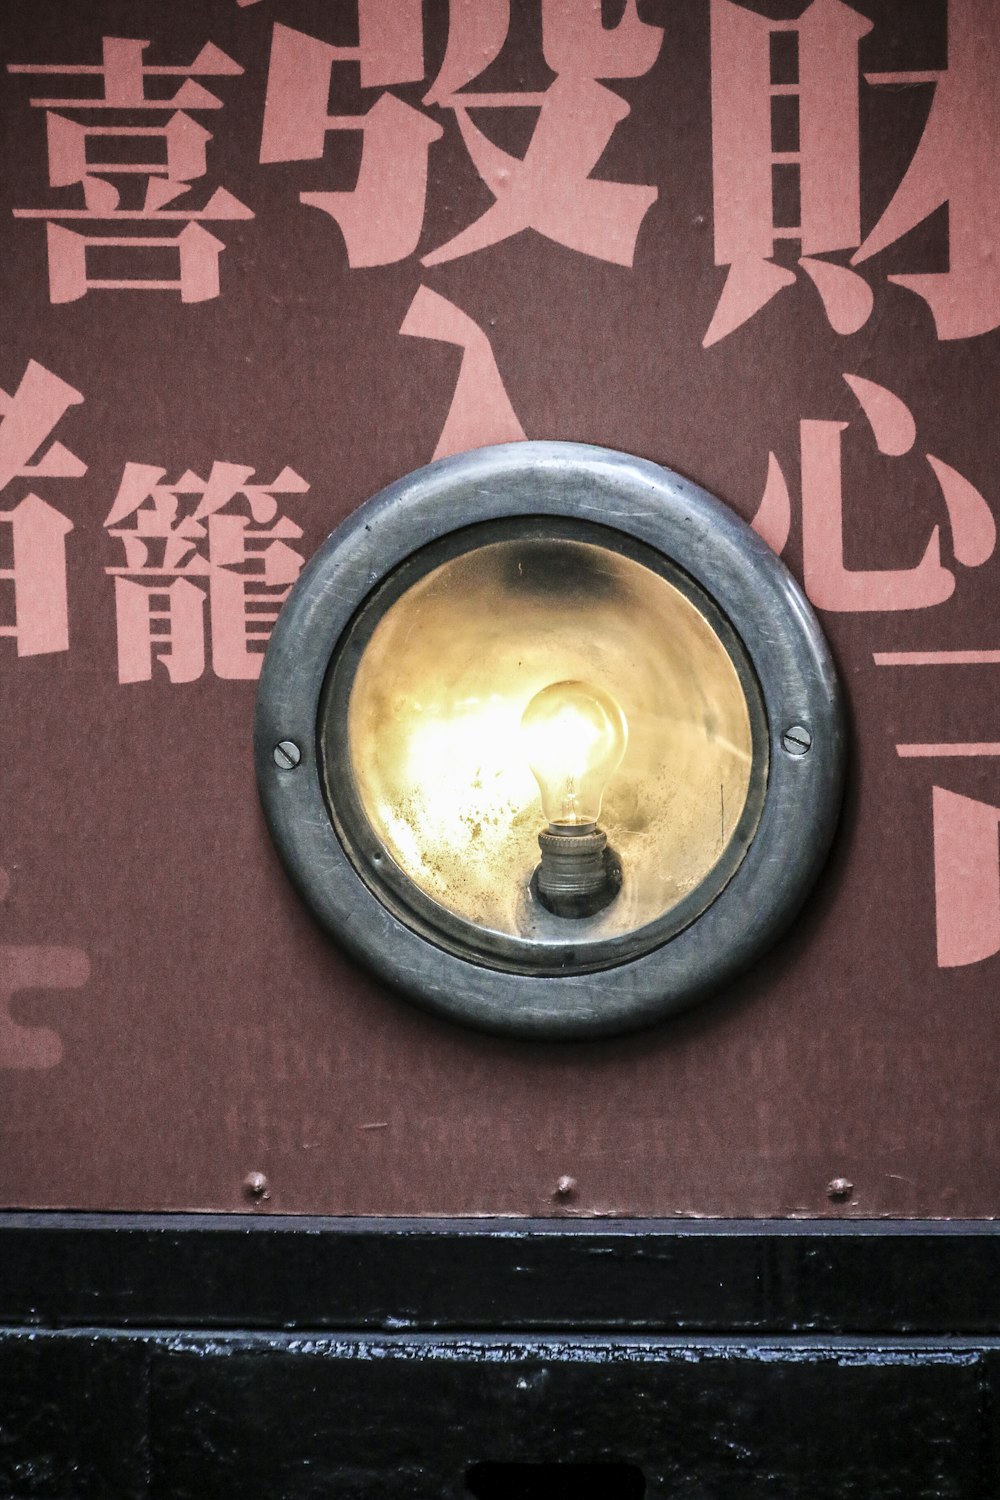 a round metal object with a light on it